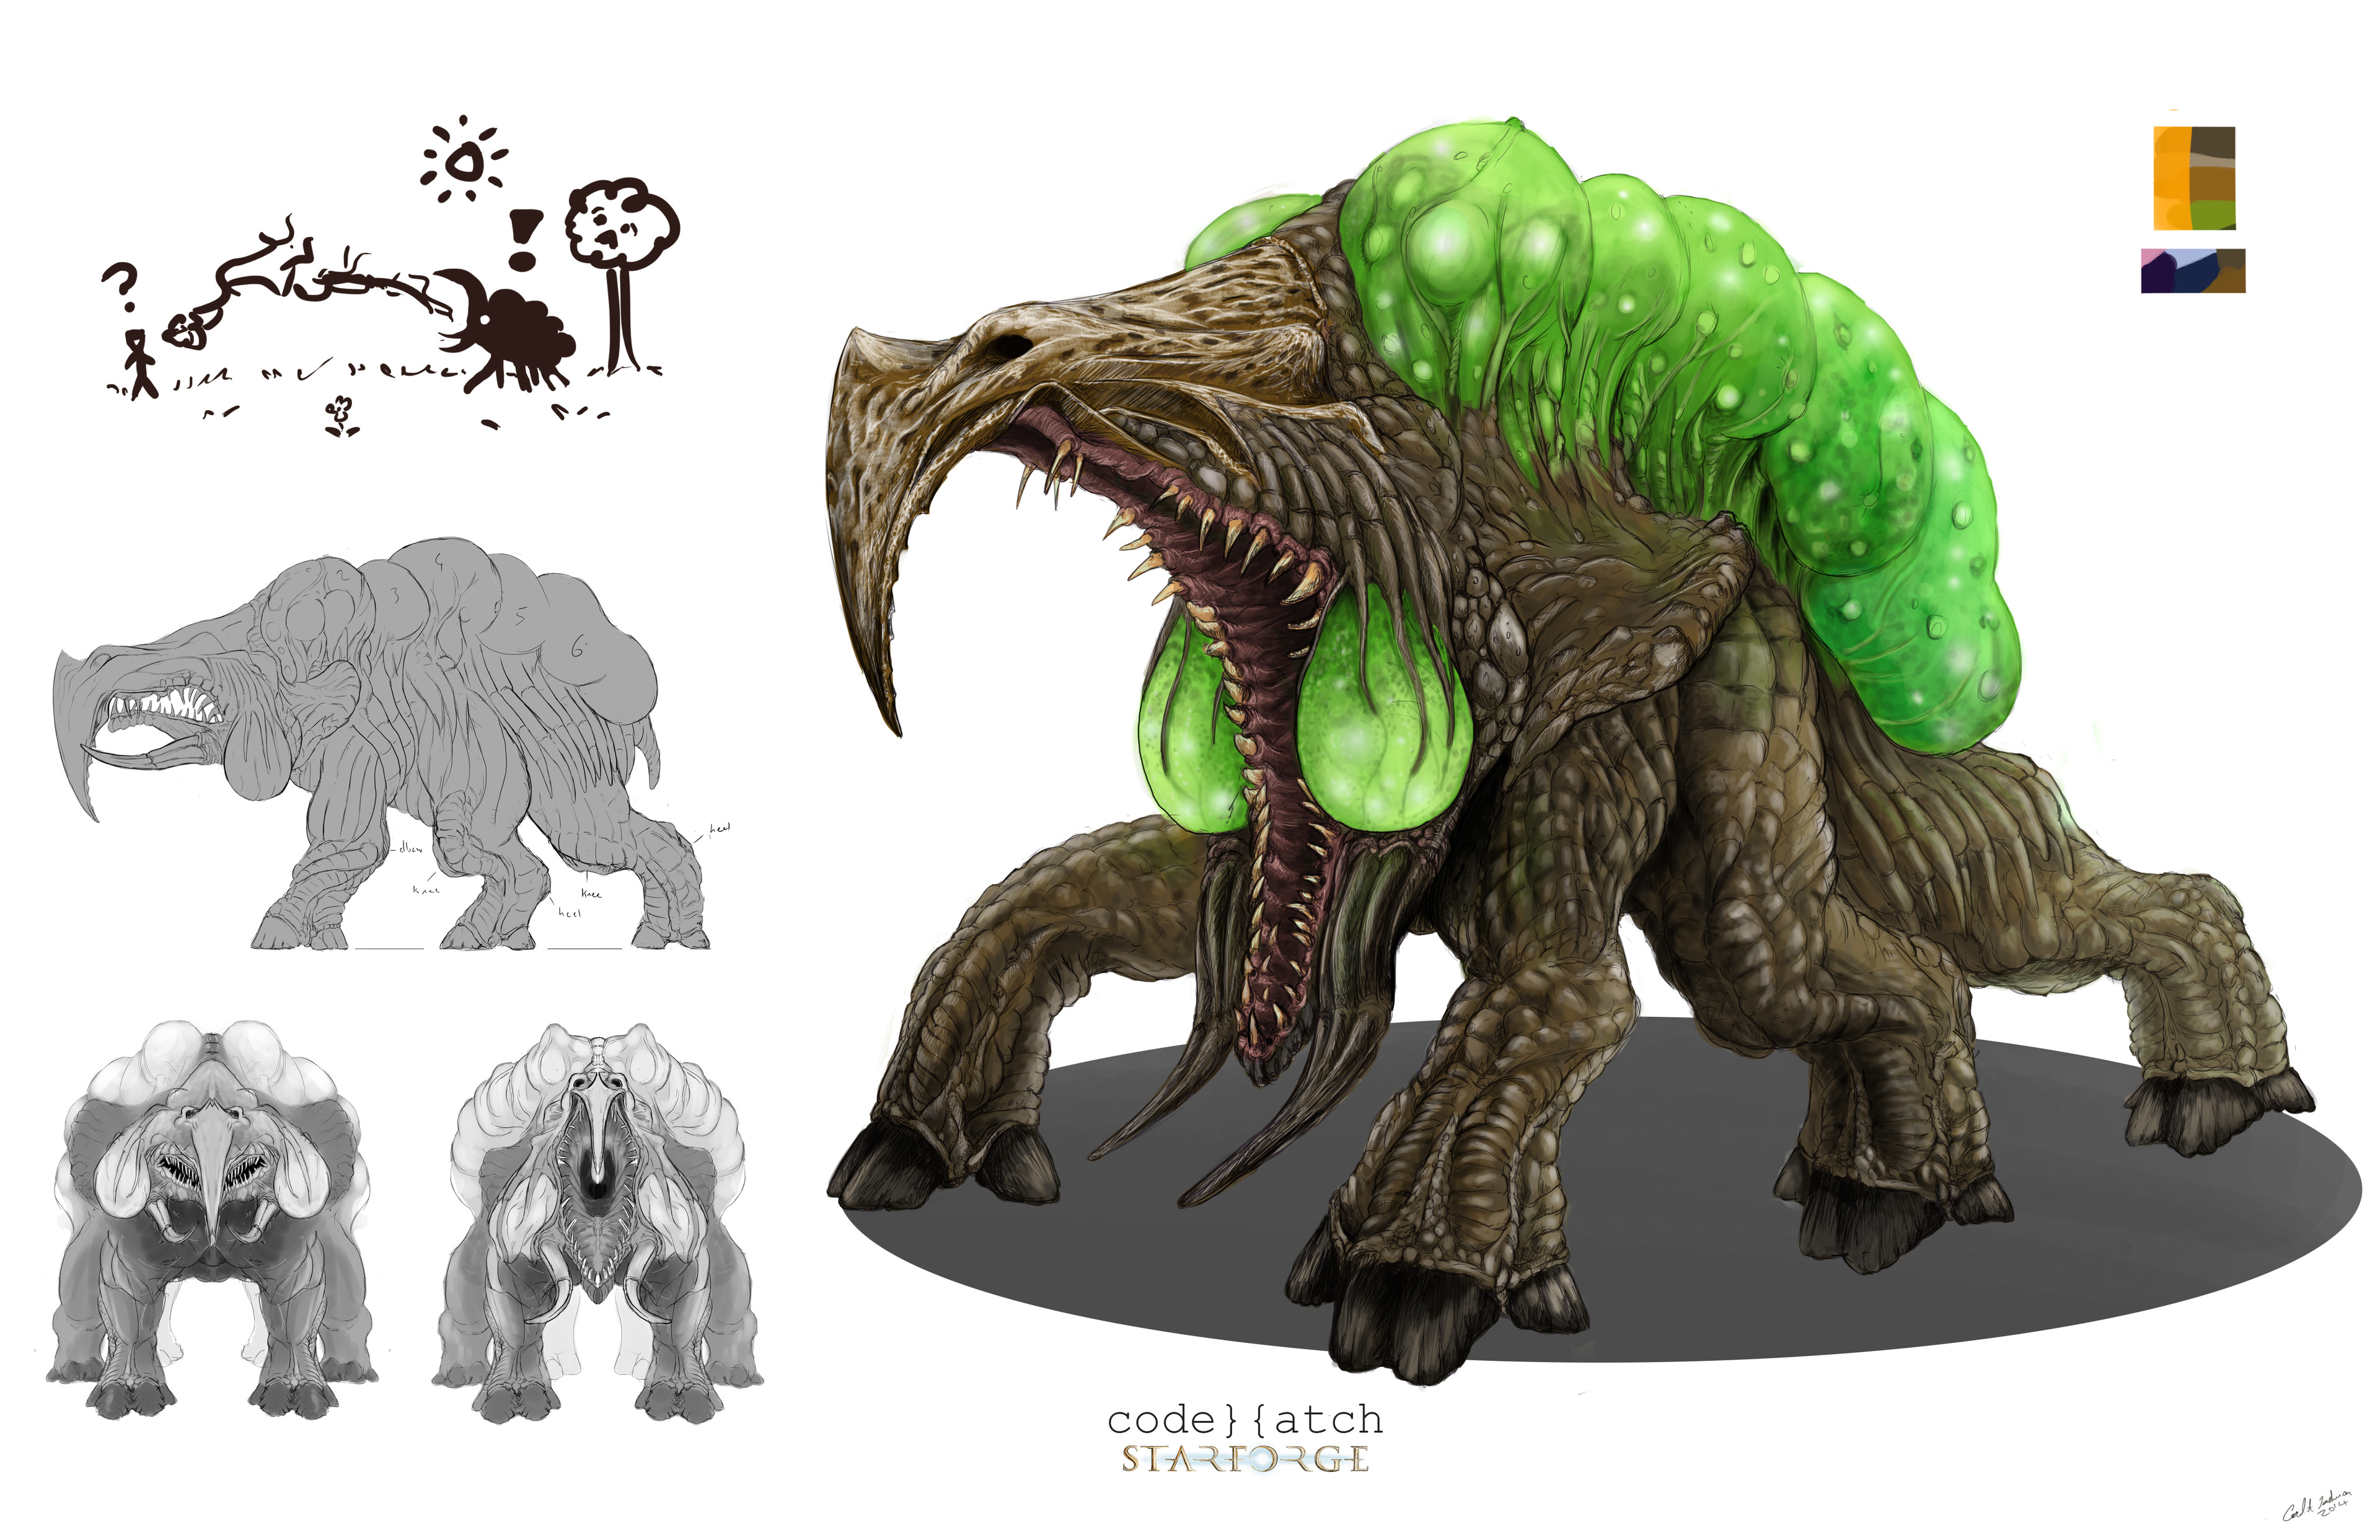 I critter I made a long time ago. It did not get implemented in the game, but was included in the art book with unused concepts.